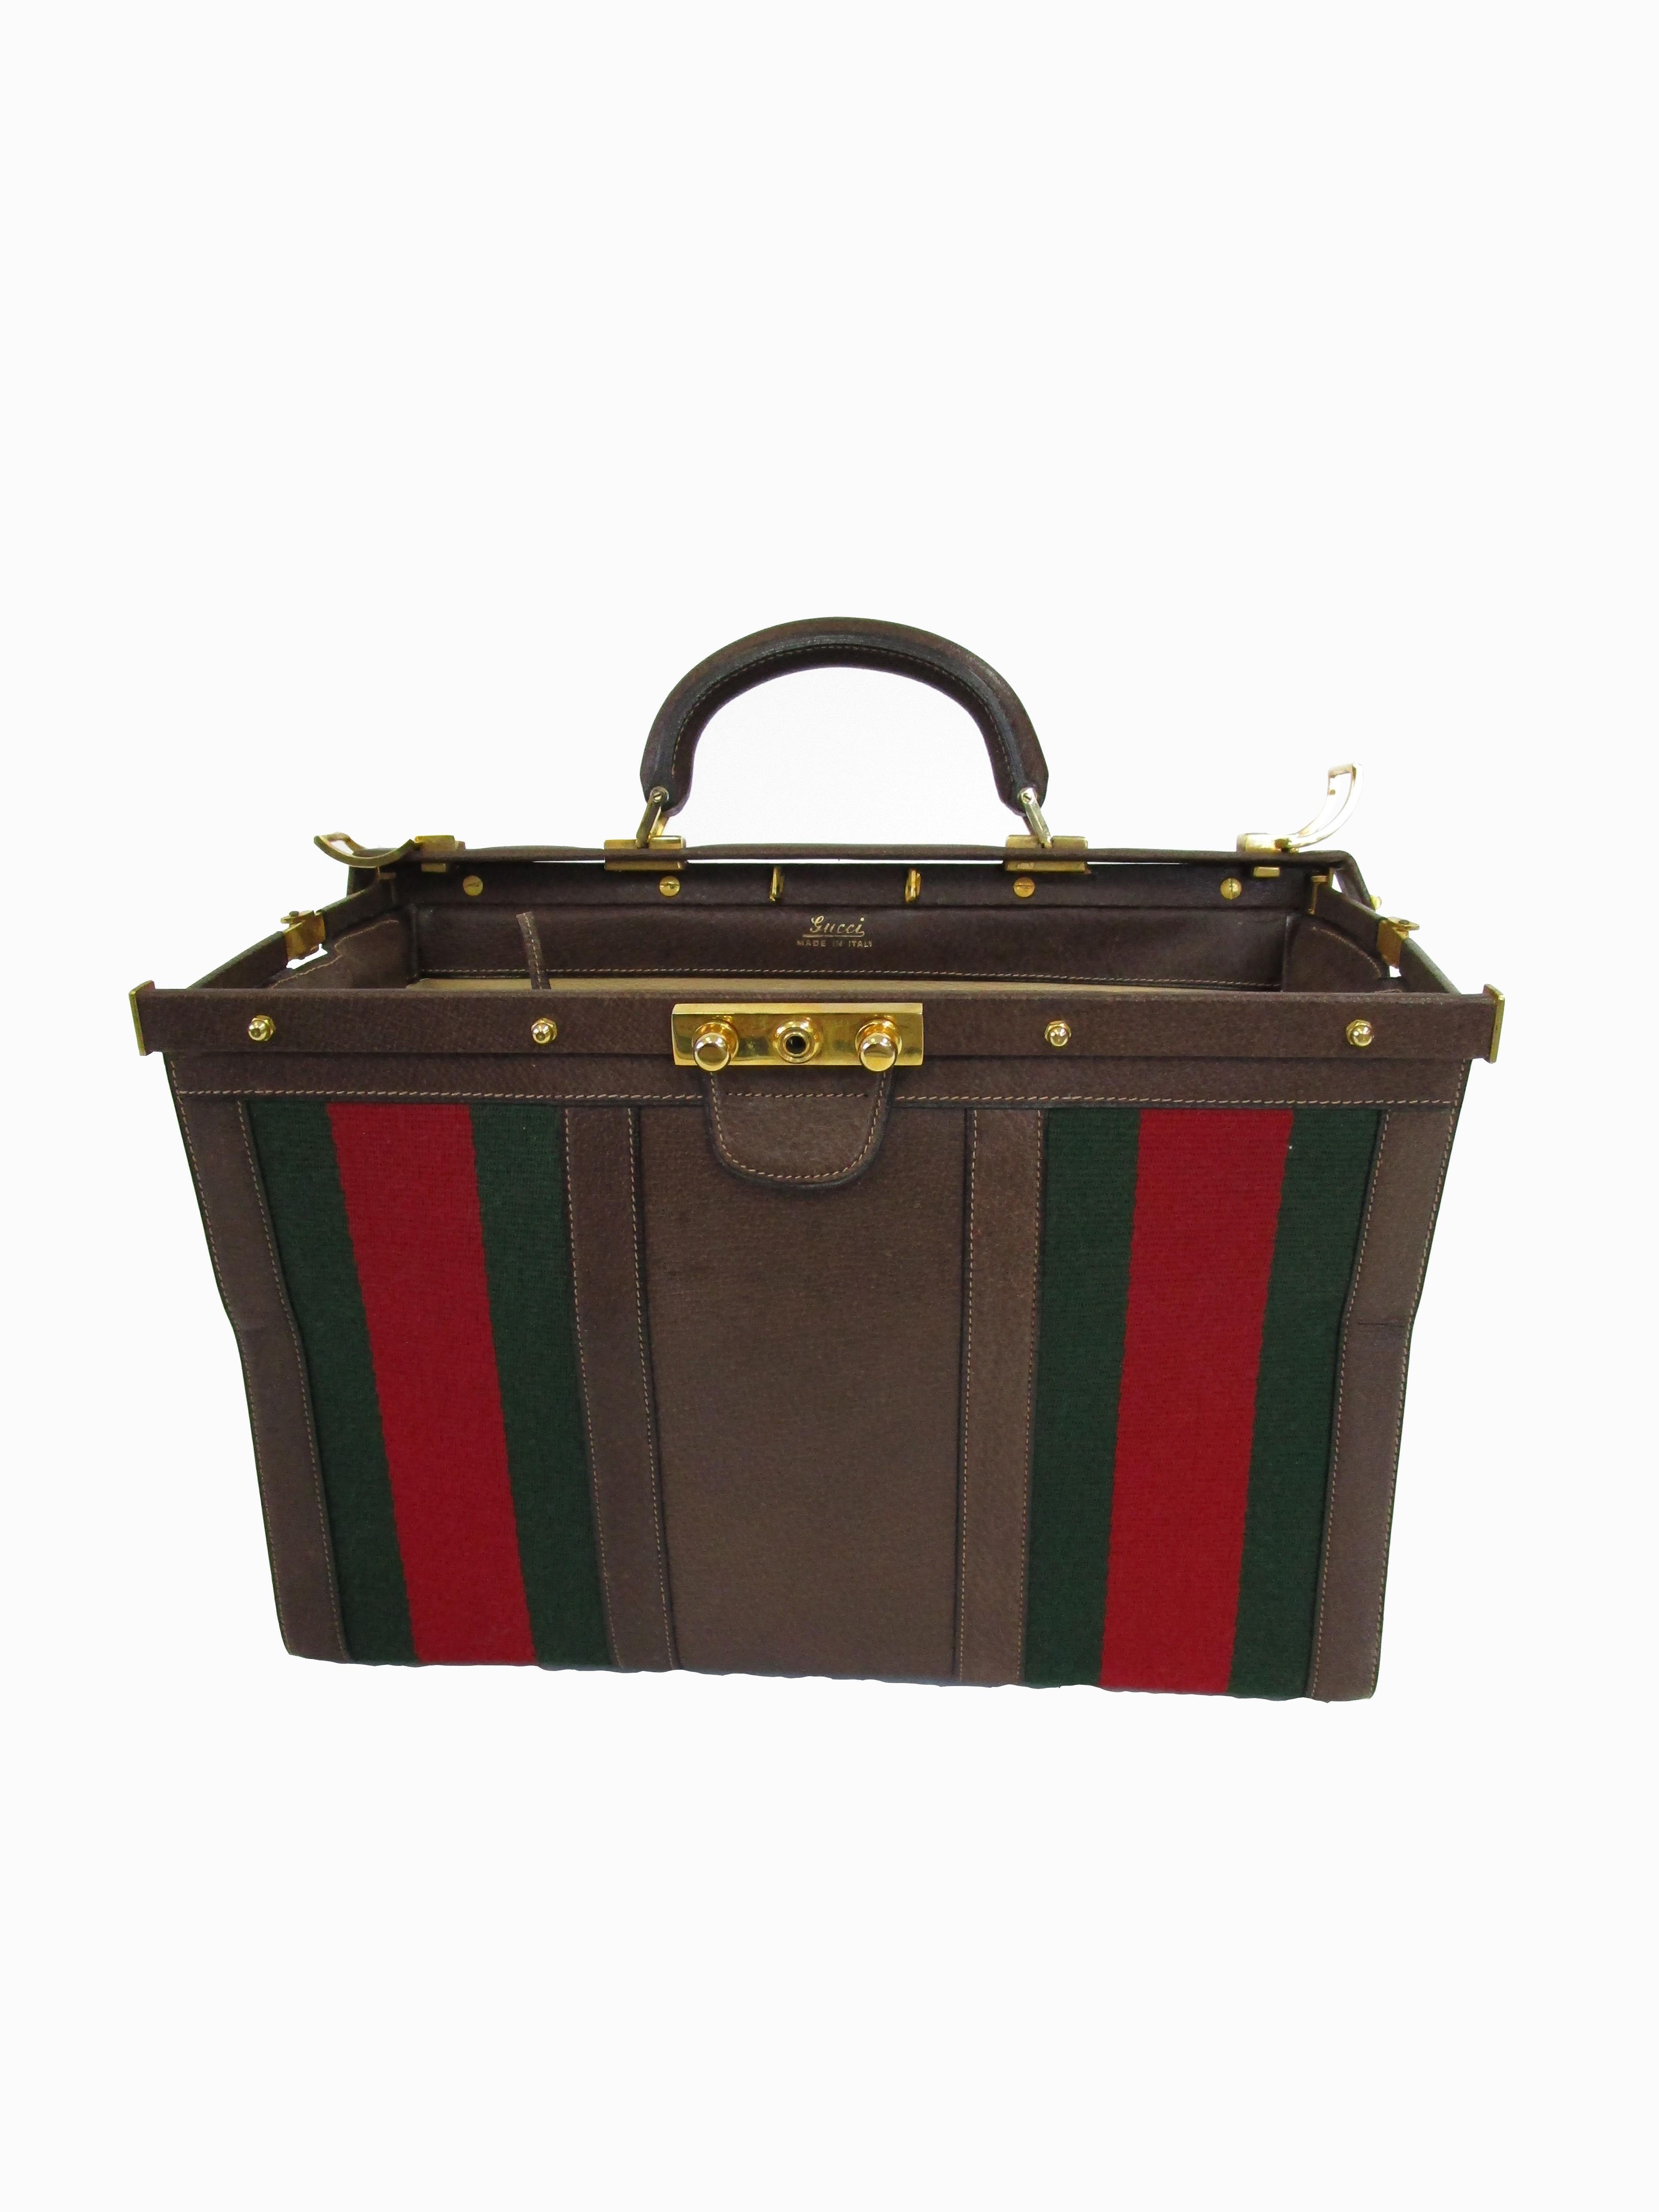 Unbelievable and rare vintage Gucci bag. Stored with care and in excellent condition for its age.  This doctors bag, also known as a Gladstone bag,  is built on a strong wired based frame, hand stitched and made of a beautiful leather grain and the